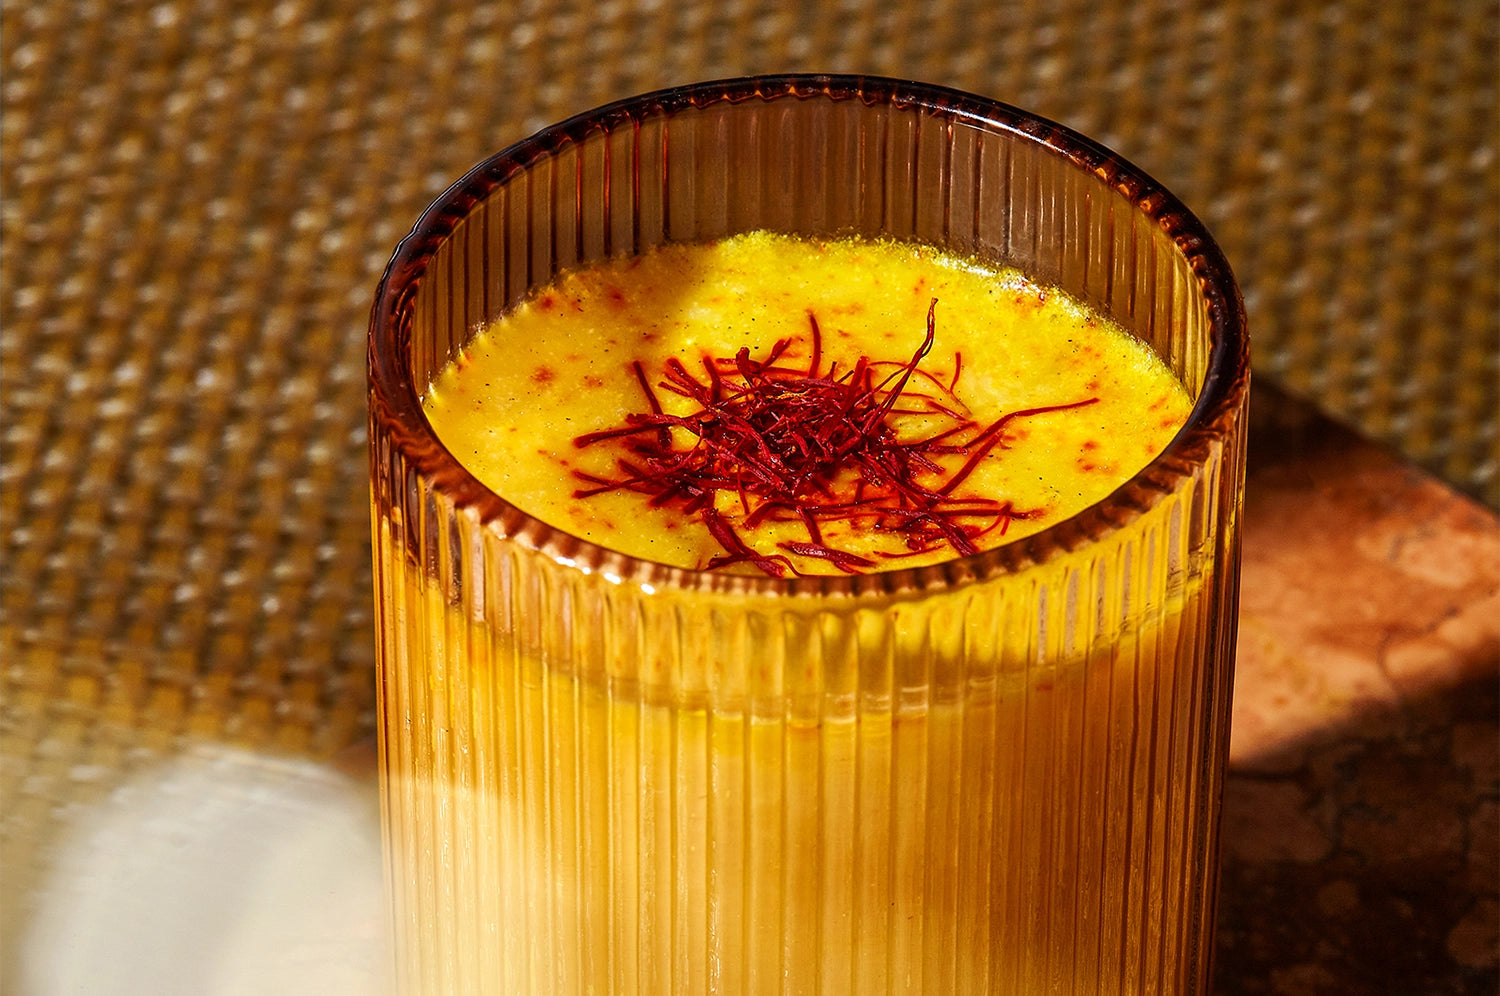 A glass of golden saffron-infused latte topped with The Fullest's saffron threads, placed on a textured surface.